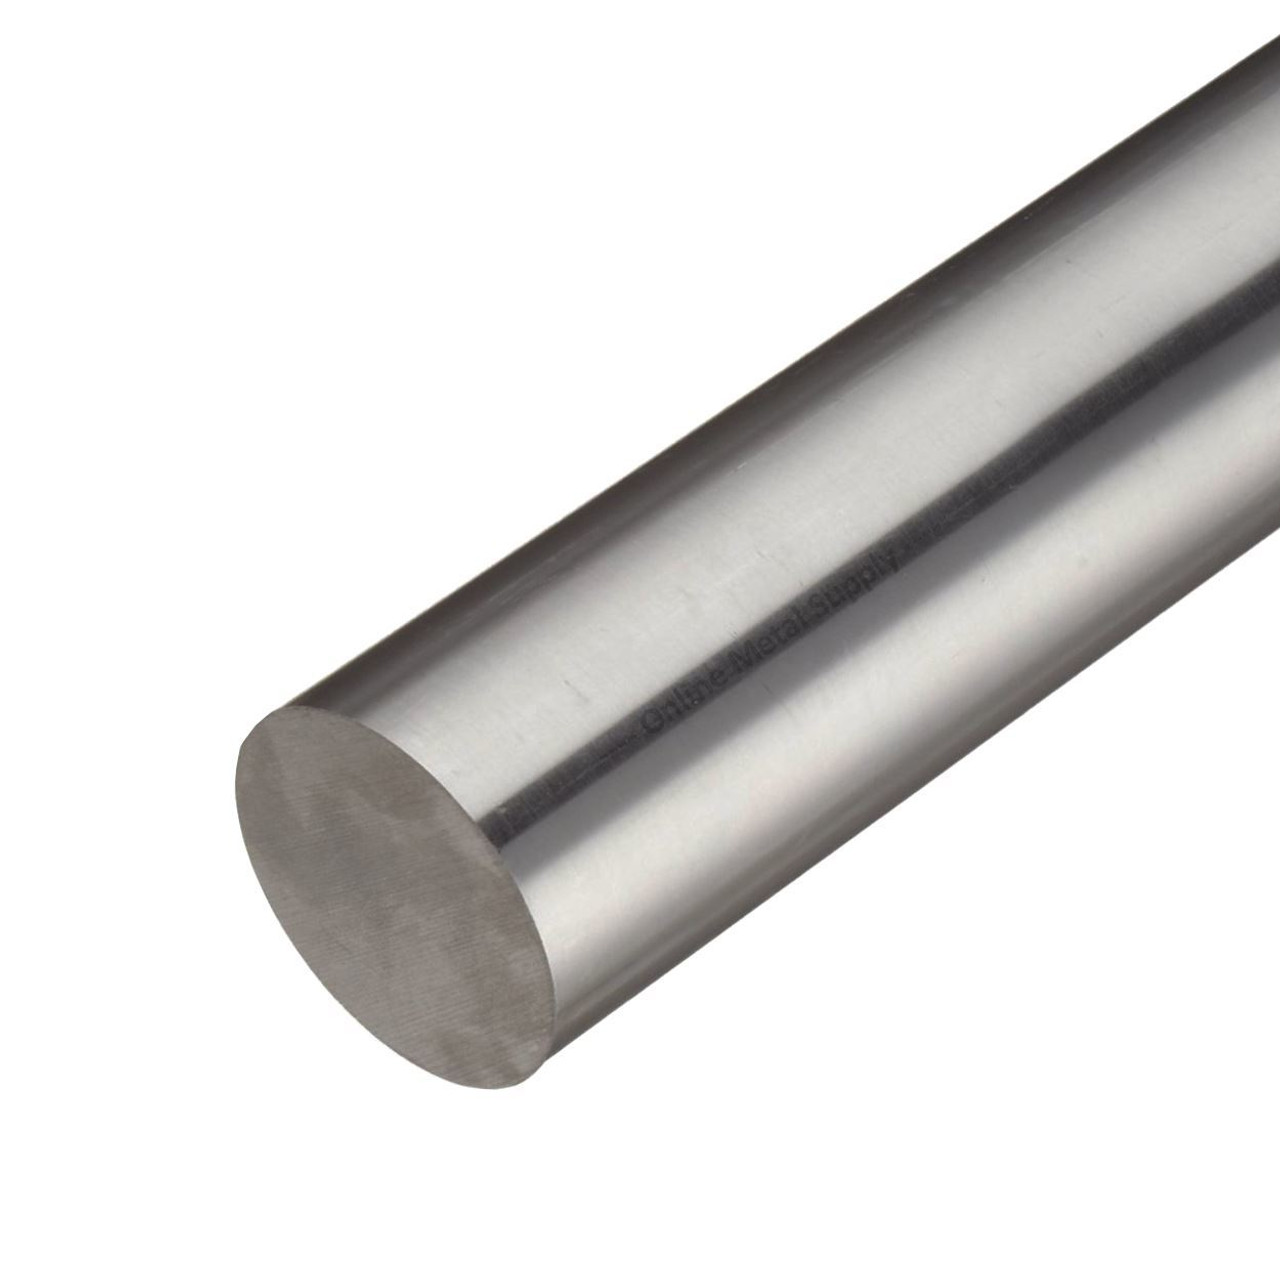 0.937 (15/16 inch) x 44 inches, 303 Stainless Steel Round Rod, Cold Finished